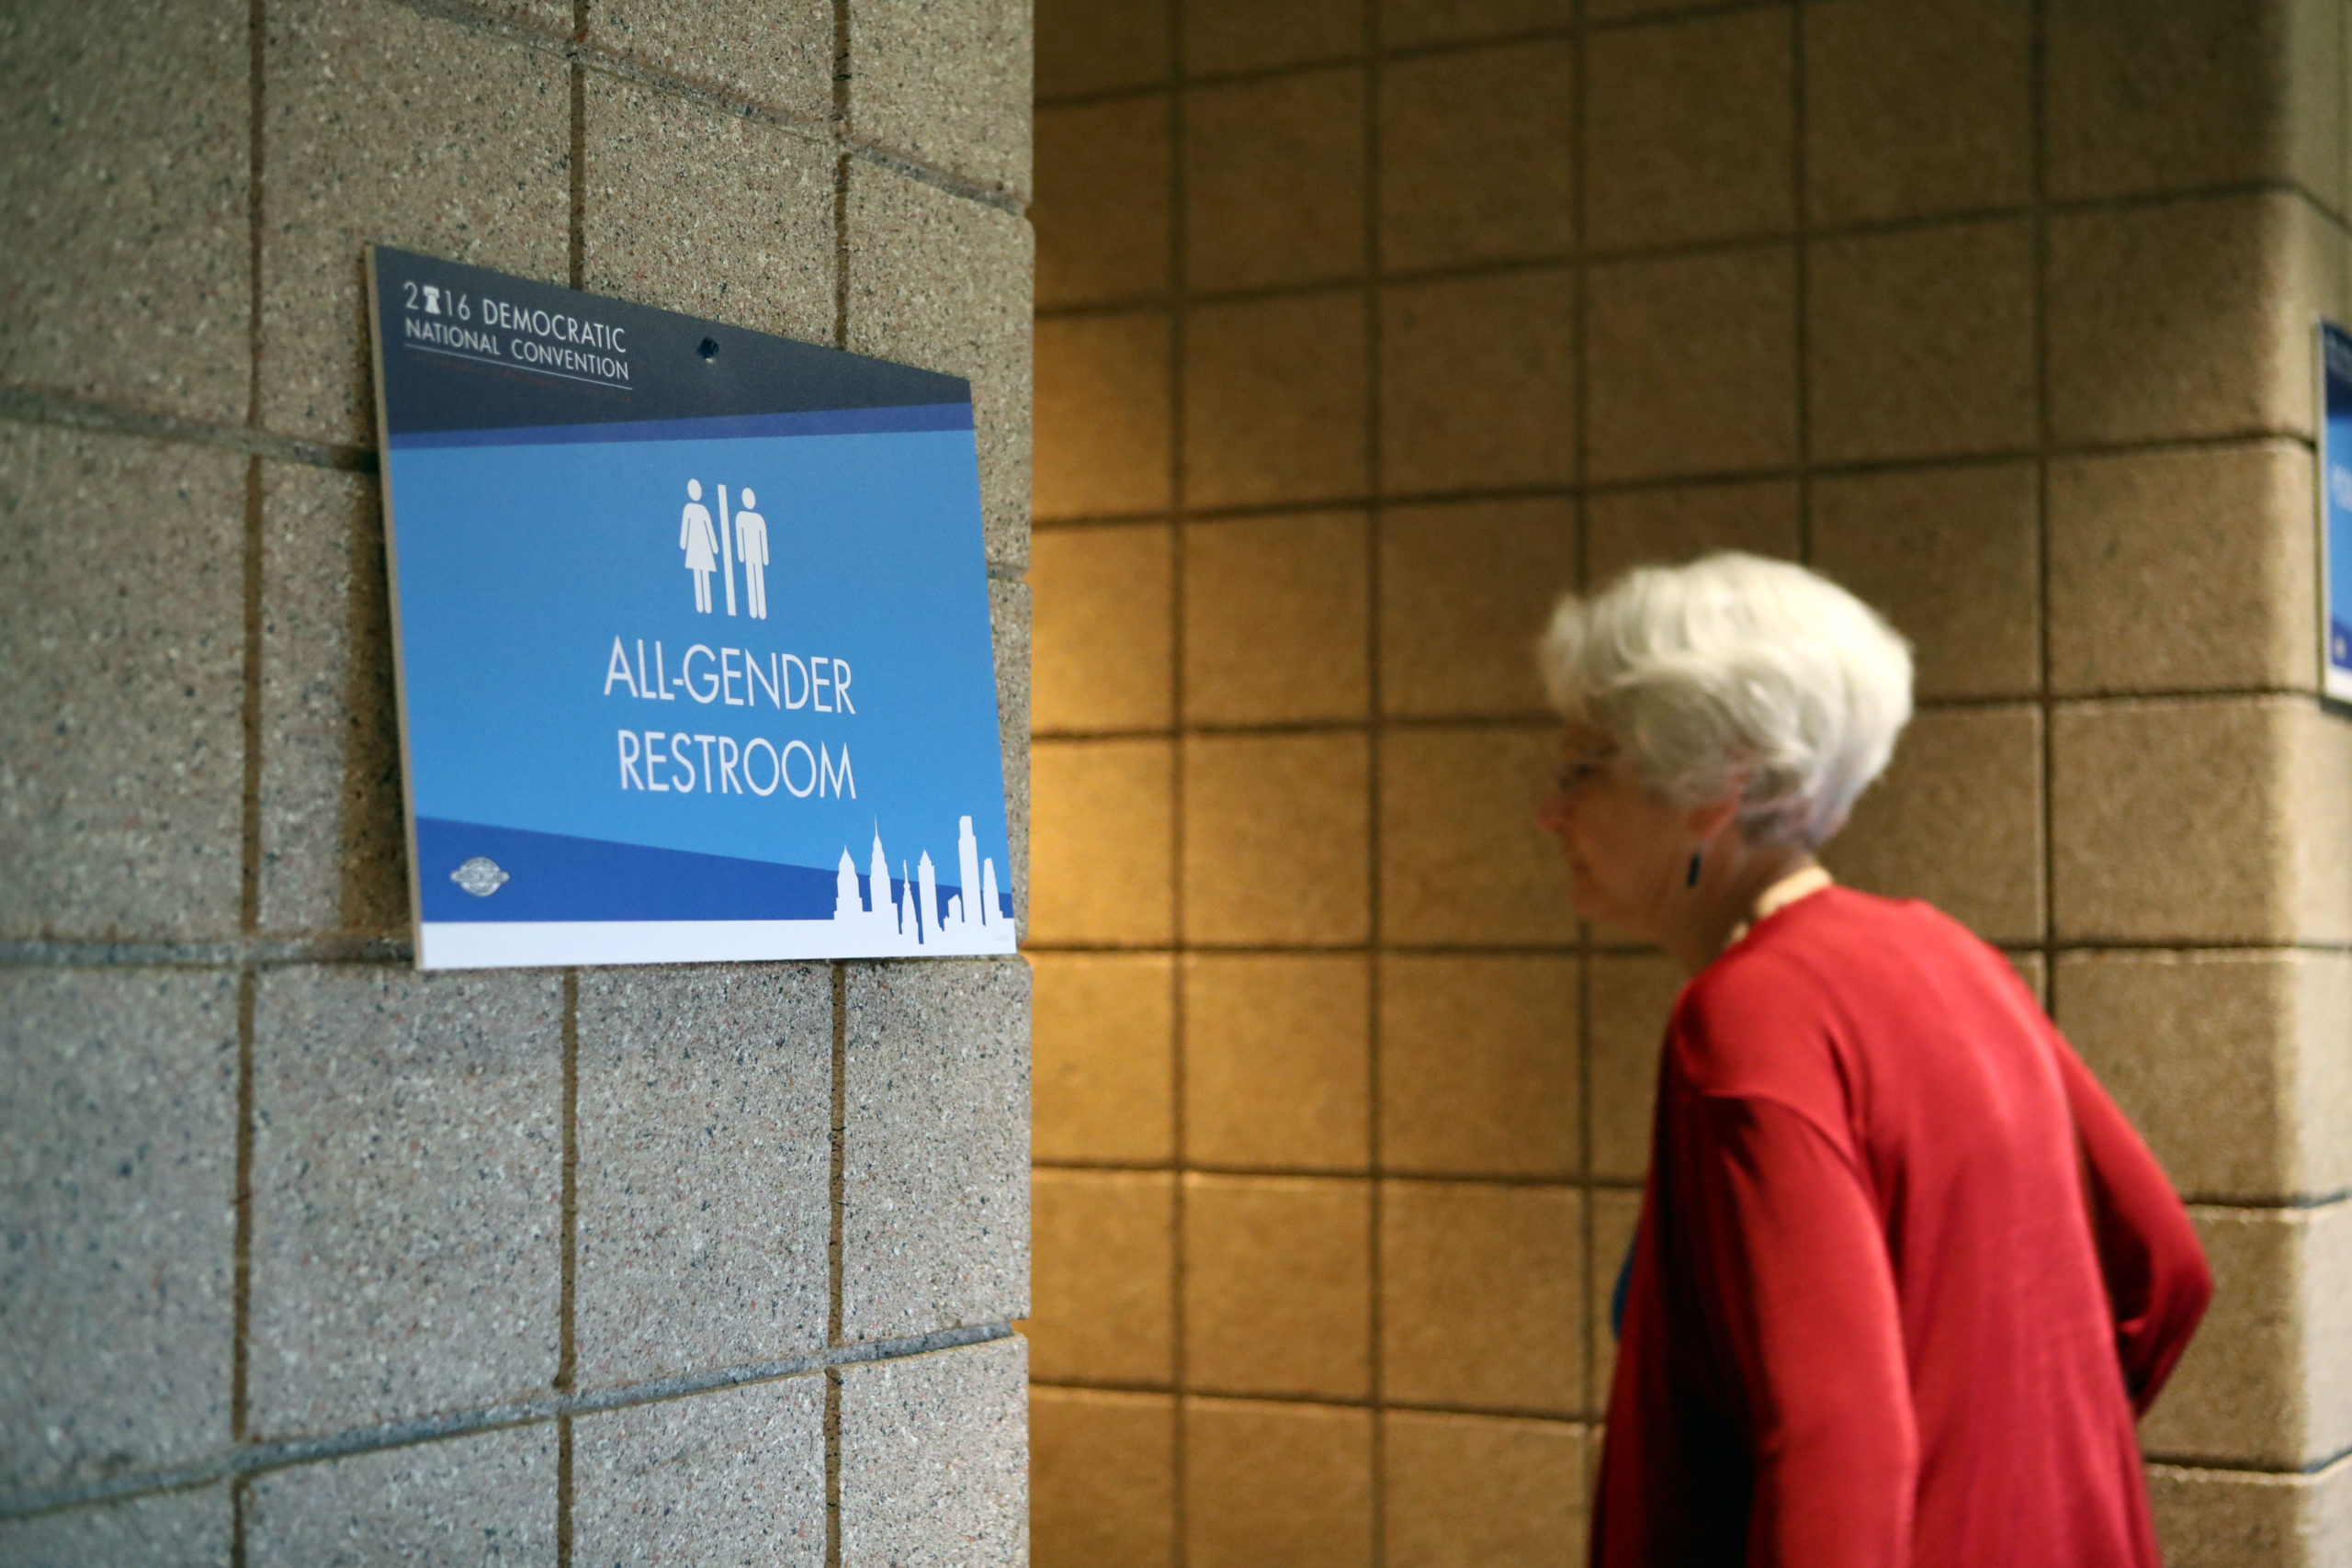 PHILADELPHIA, PA - JULY 26: A woman enters all gender public restroom at Wells Fargo Center before day two of the Democratic National Convention on July 26, 2016 in Philadelphia, Pennsylvania. Former President Bill Clinton will speak at the second day of Democratic Nation Convention. (Photo by Jessica Kourkounis/Getty Images)